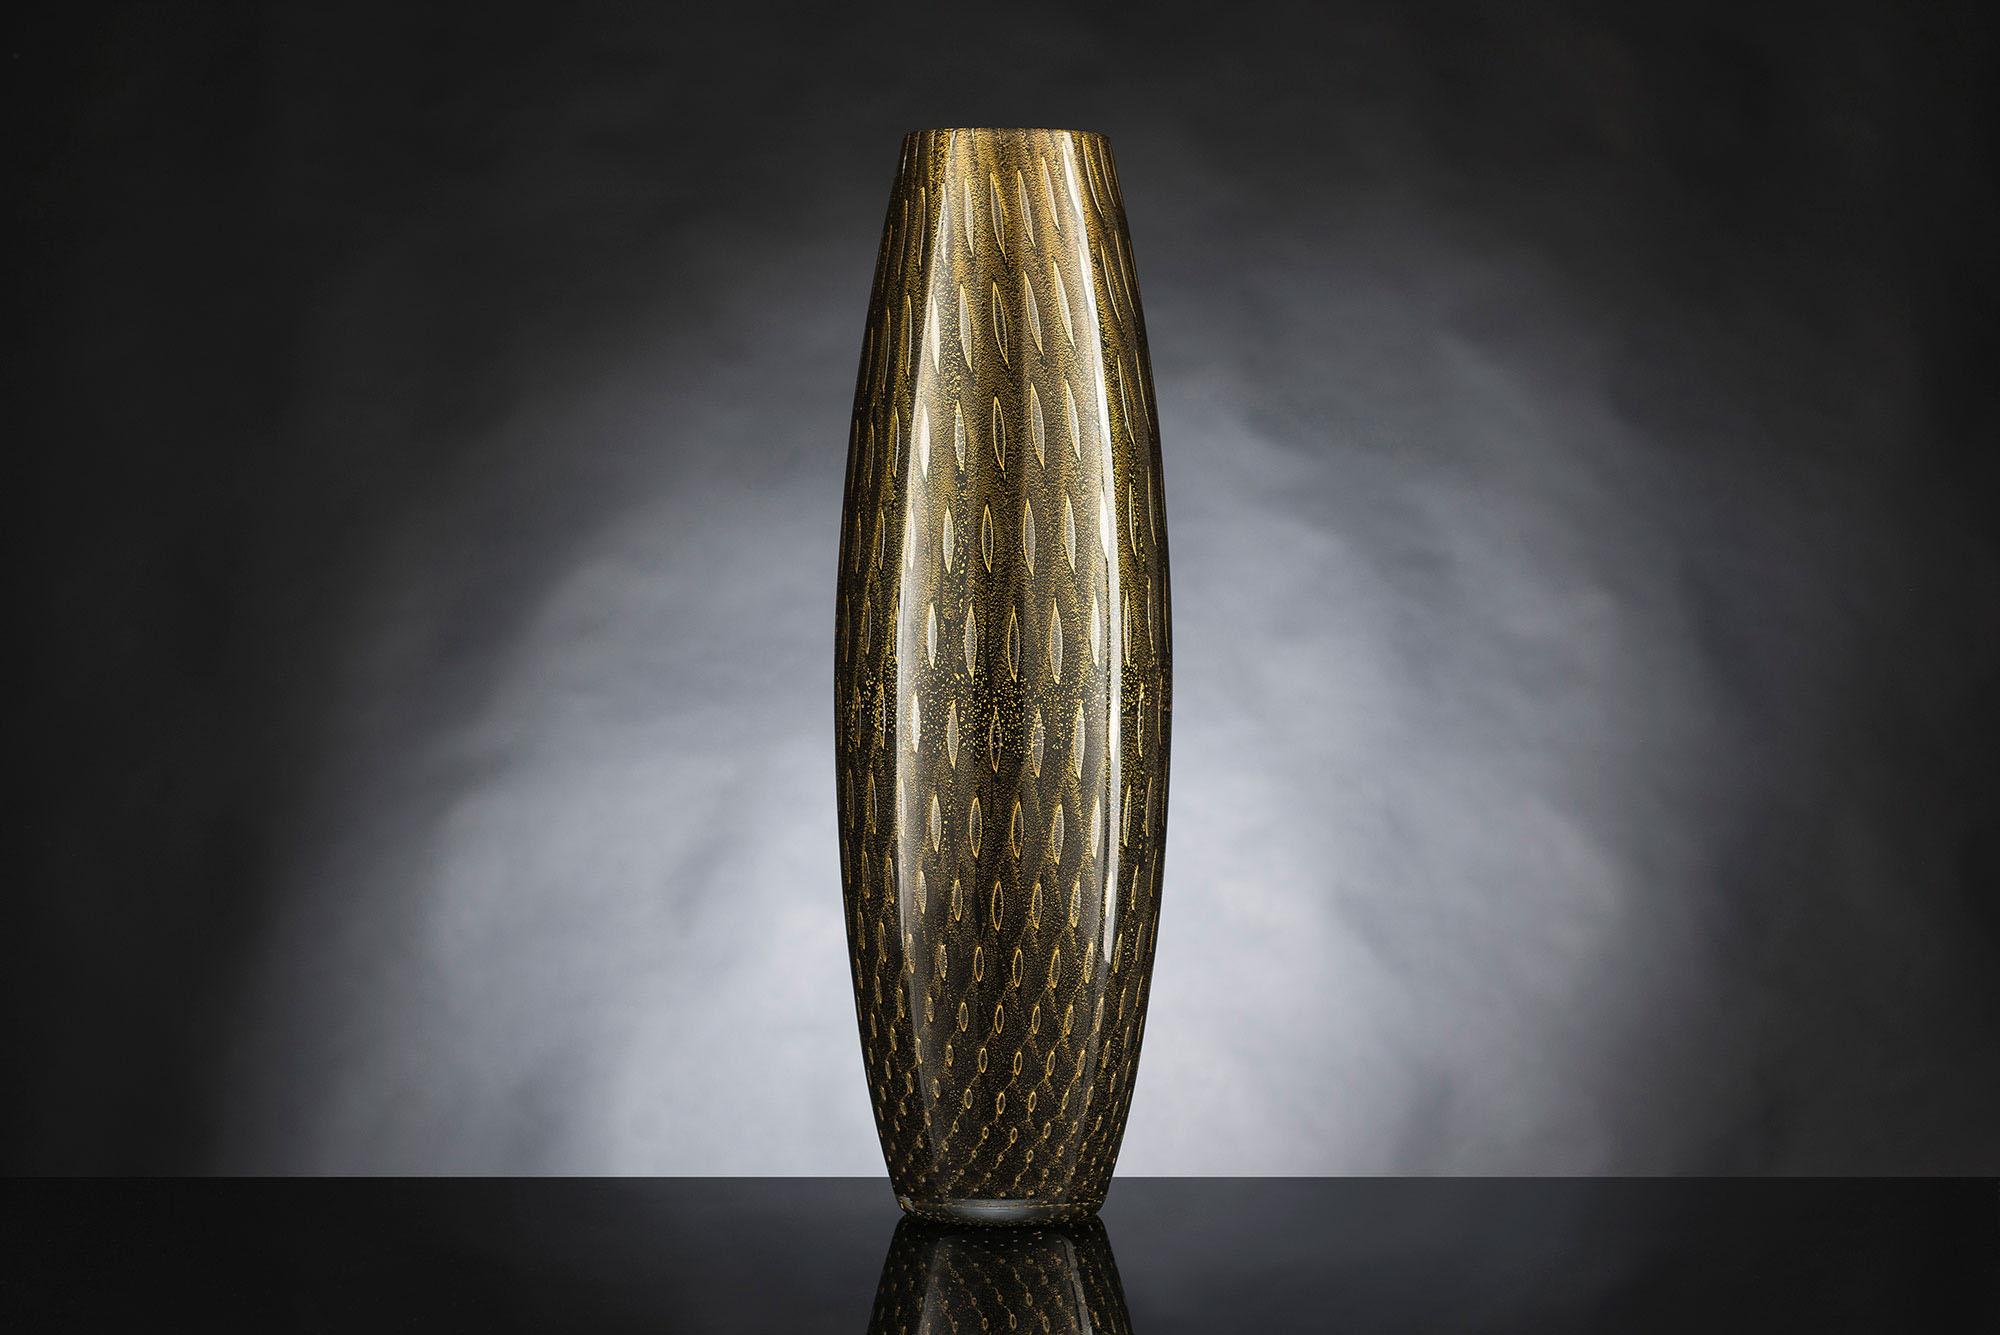 Deep focus on craftsmanship and made in Italy are emphasized by Muranese glass that characterizes several new products. The oldest handmade ability worldwide known is nowadays one of the few forms of crafts related to the world of art and design